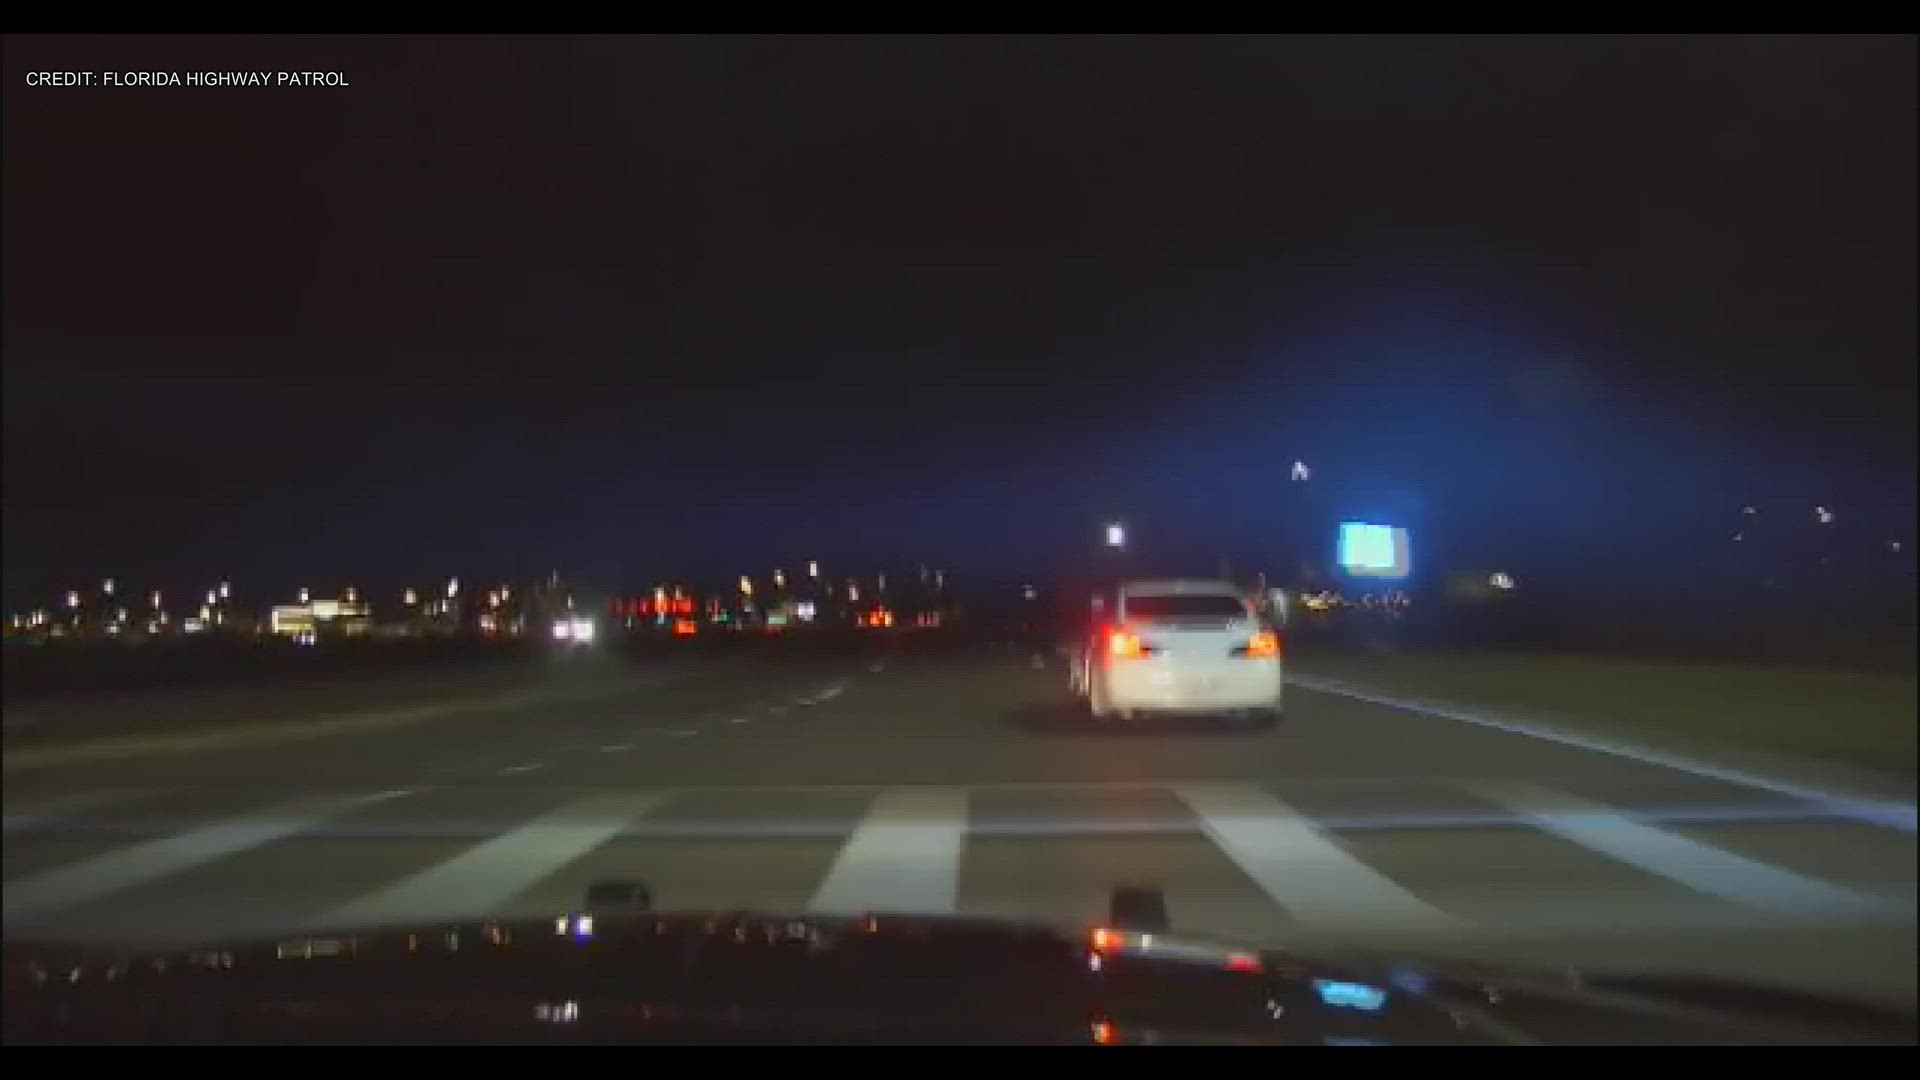 After the car made a U-Turn, the trooper was able to conduct a PIT maneuver and end the pursuit.